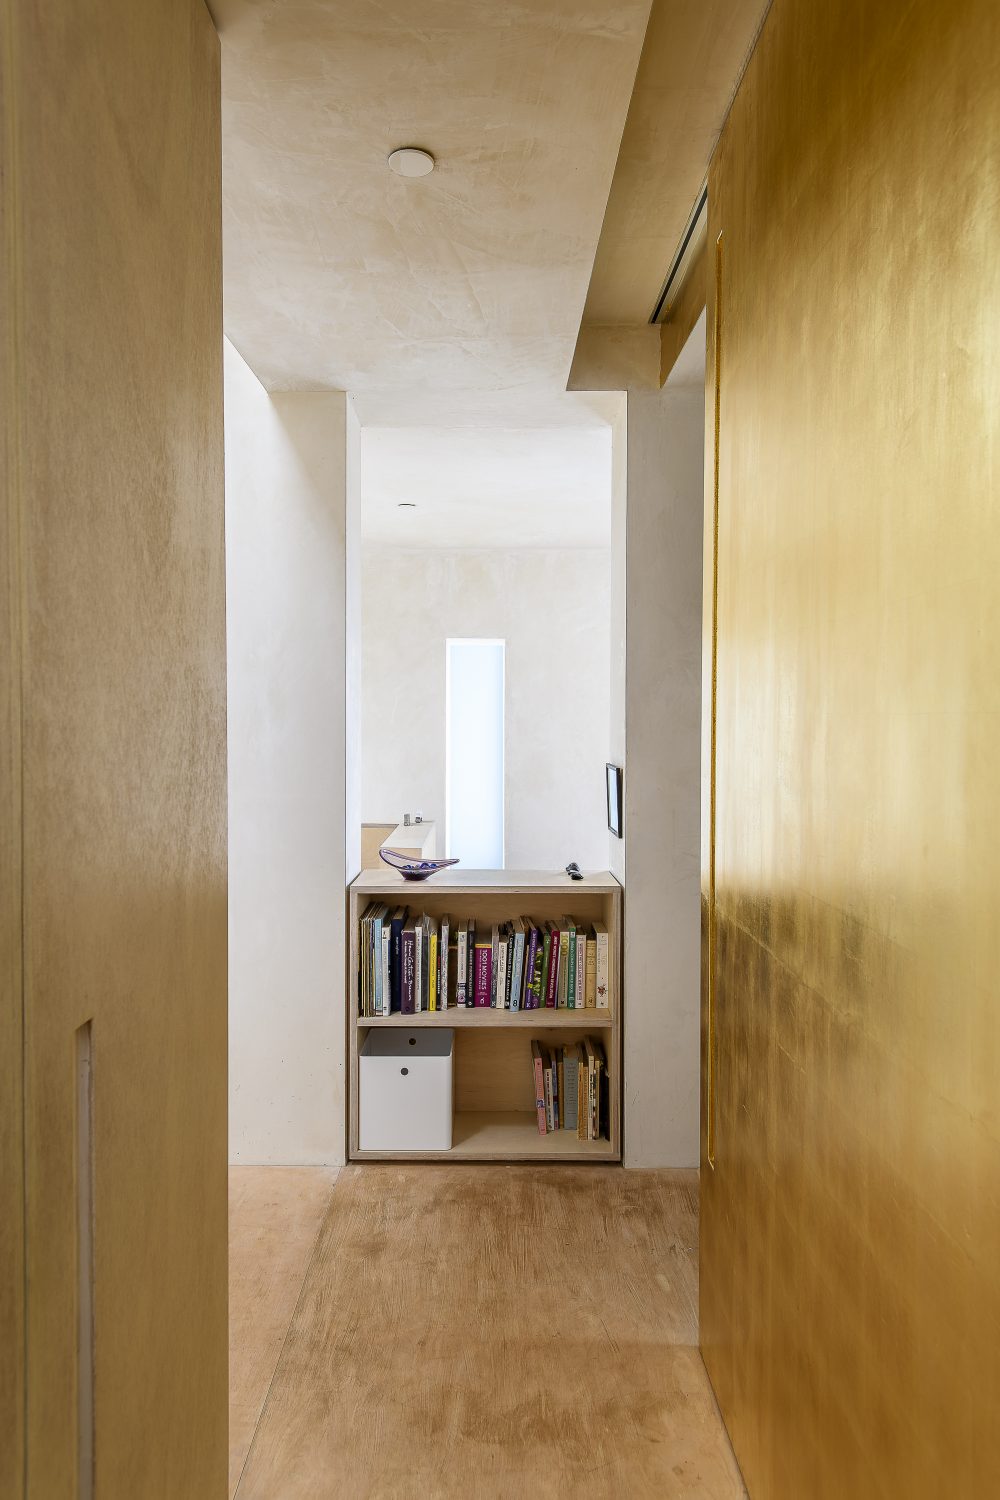 Birch ply is used in every room and on a lot of the floors